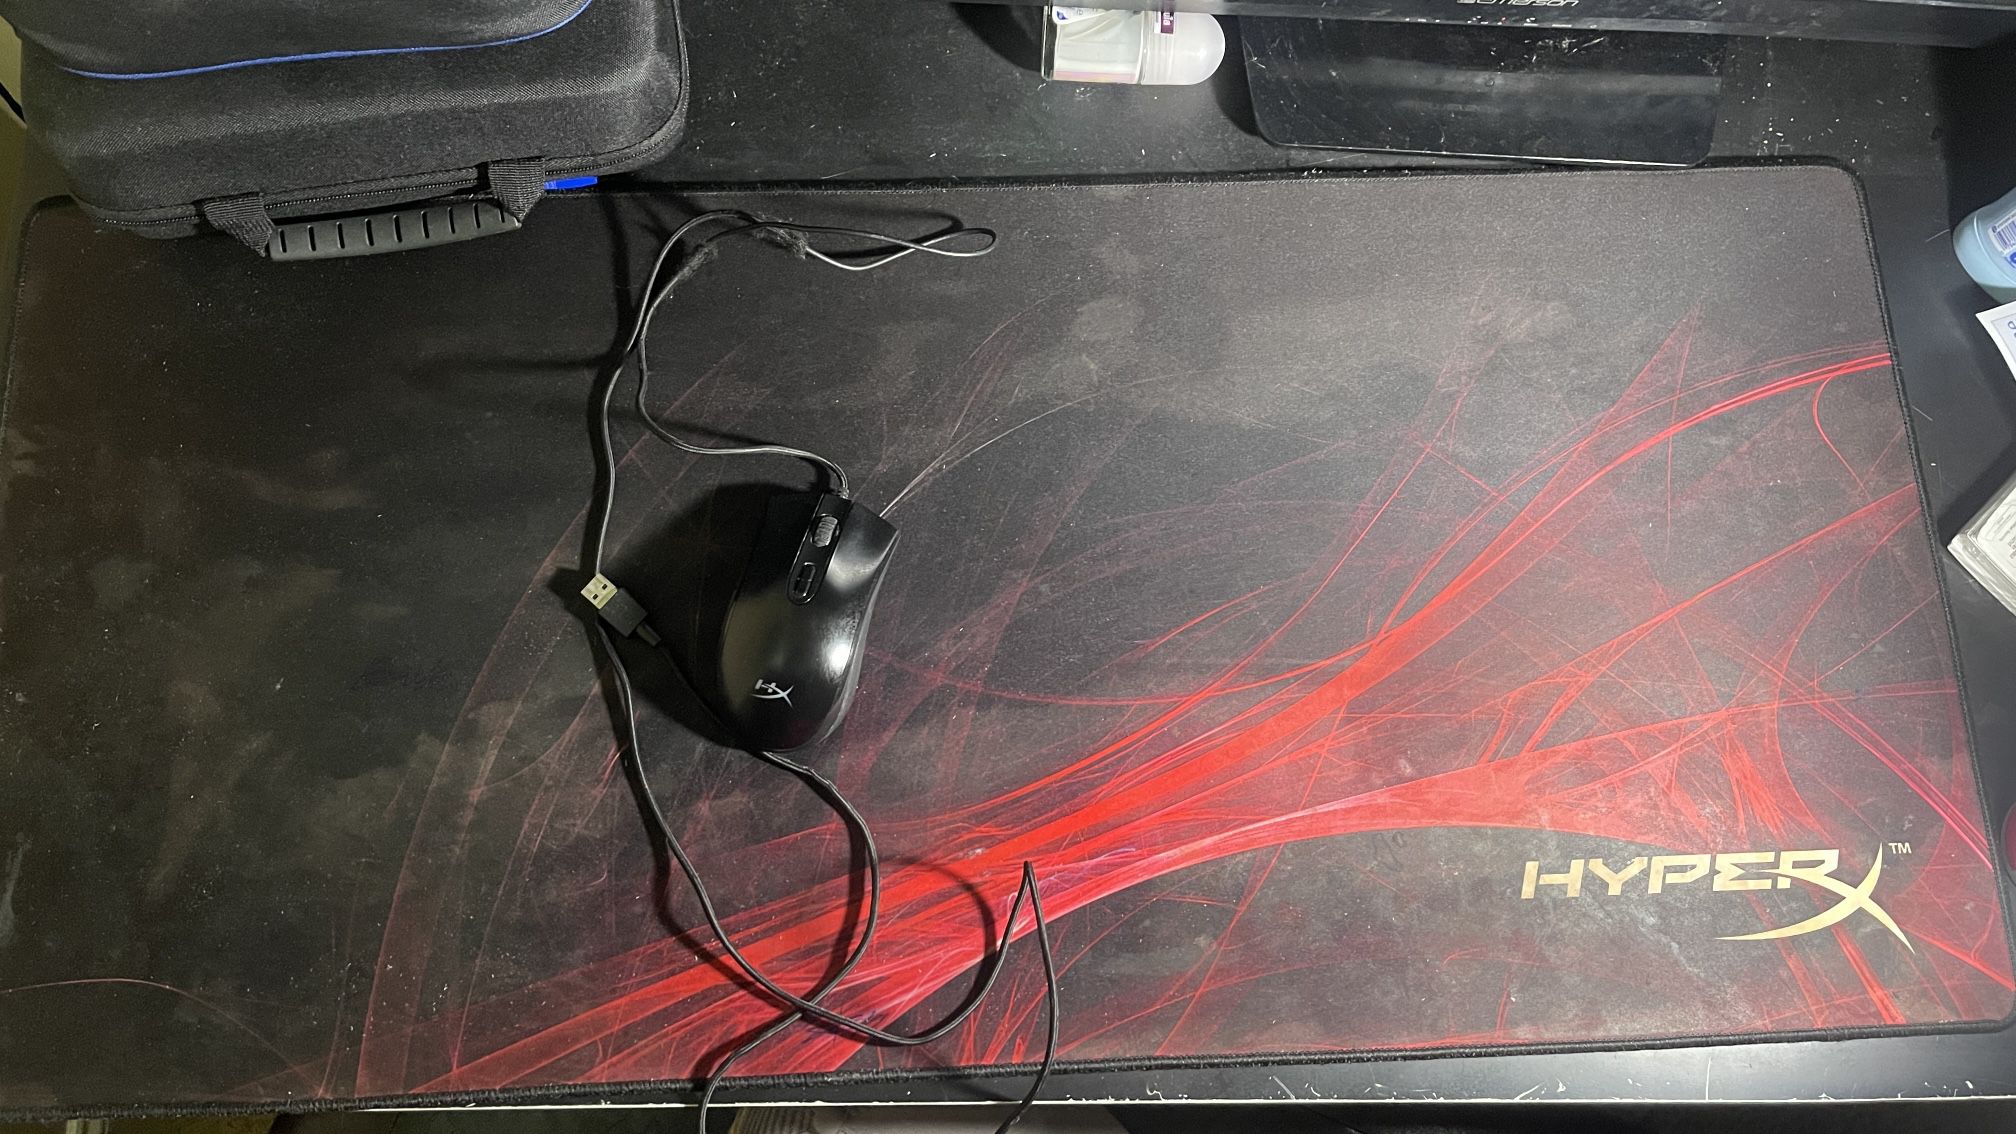 Large HyperX Mouse Pad And RGB HyperX Mouse